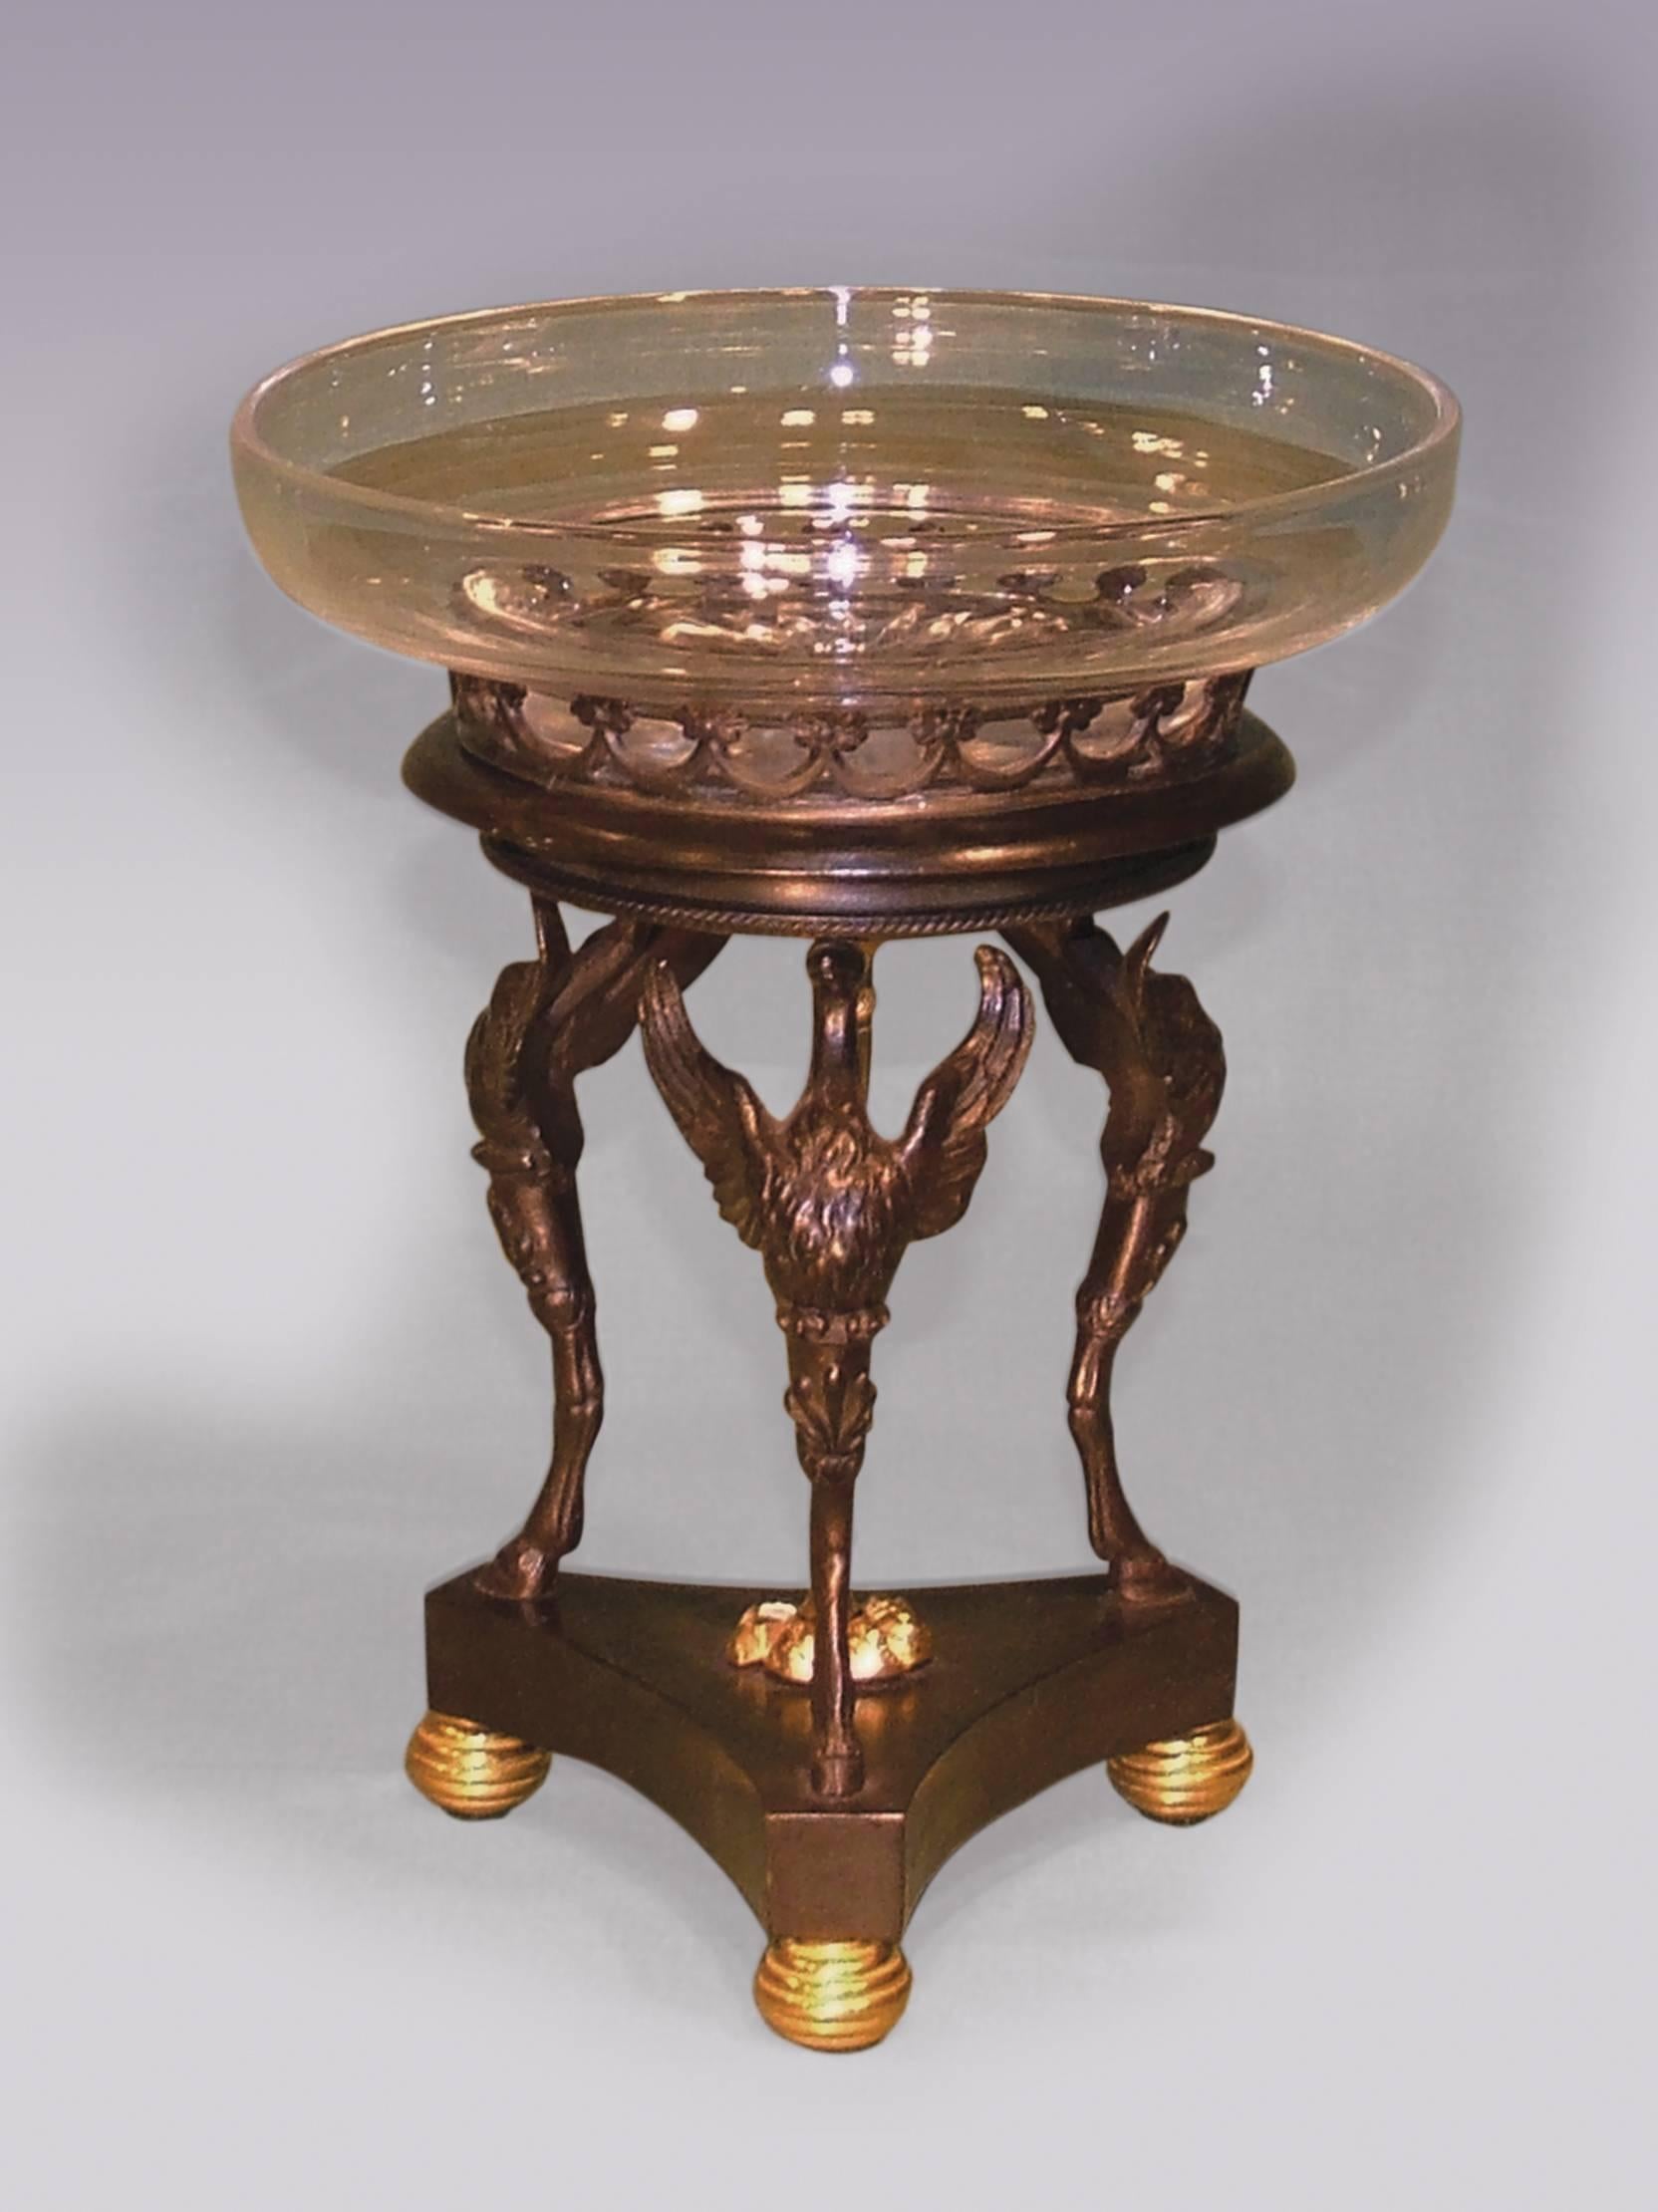 An early 19th century Regency period bronze and ormolu single Tazza having a galleried top, raised on triple swan and hoof monopodia with central engine turned tapering column, supported on triform platform base ending on reeded ball feet. (Fitted